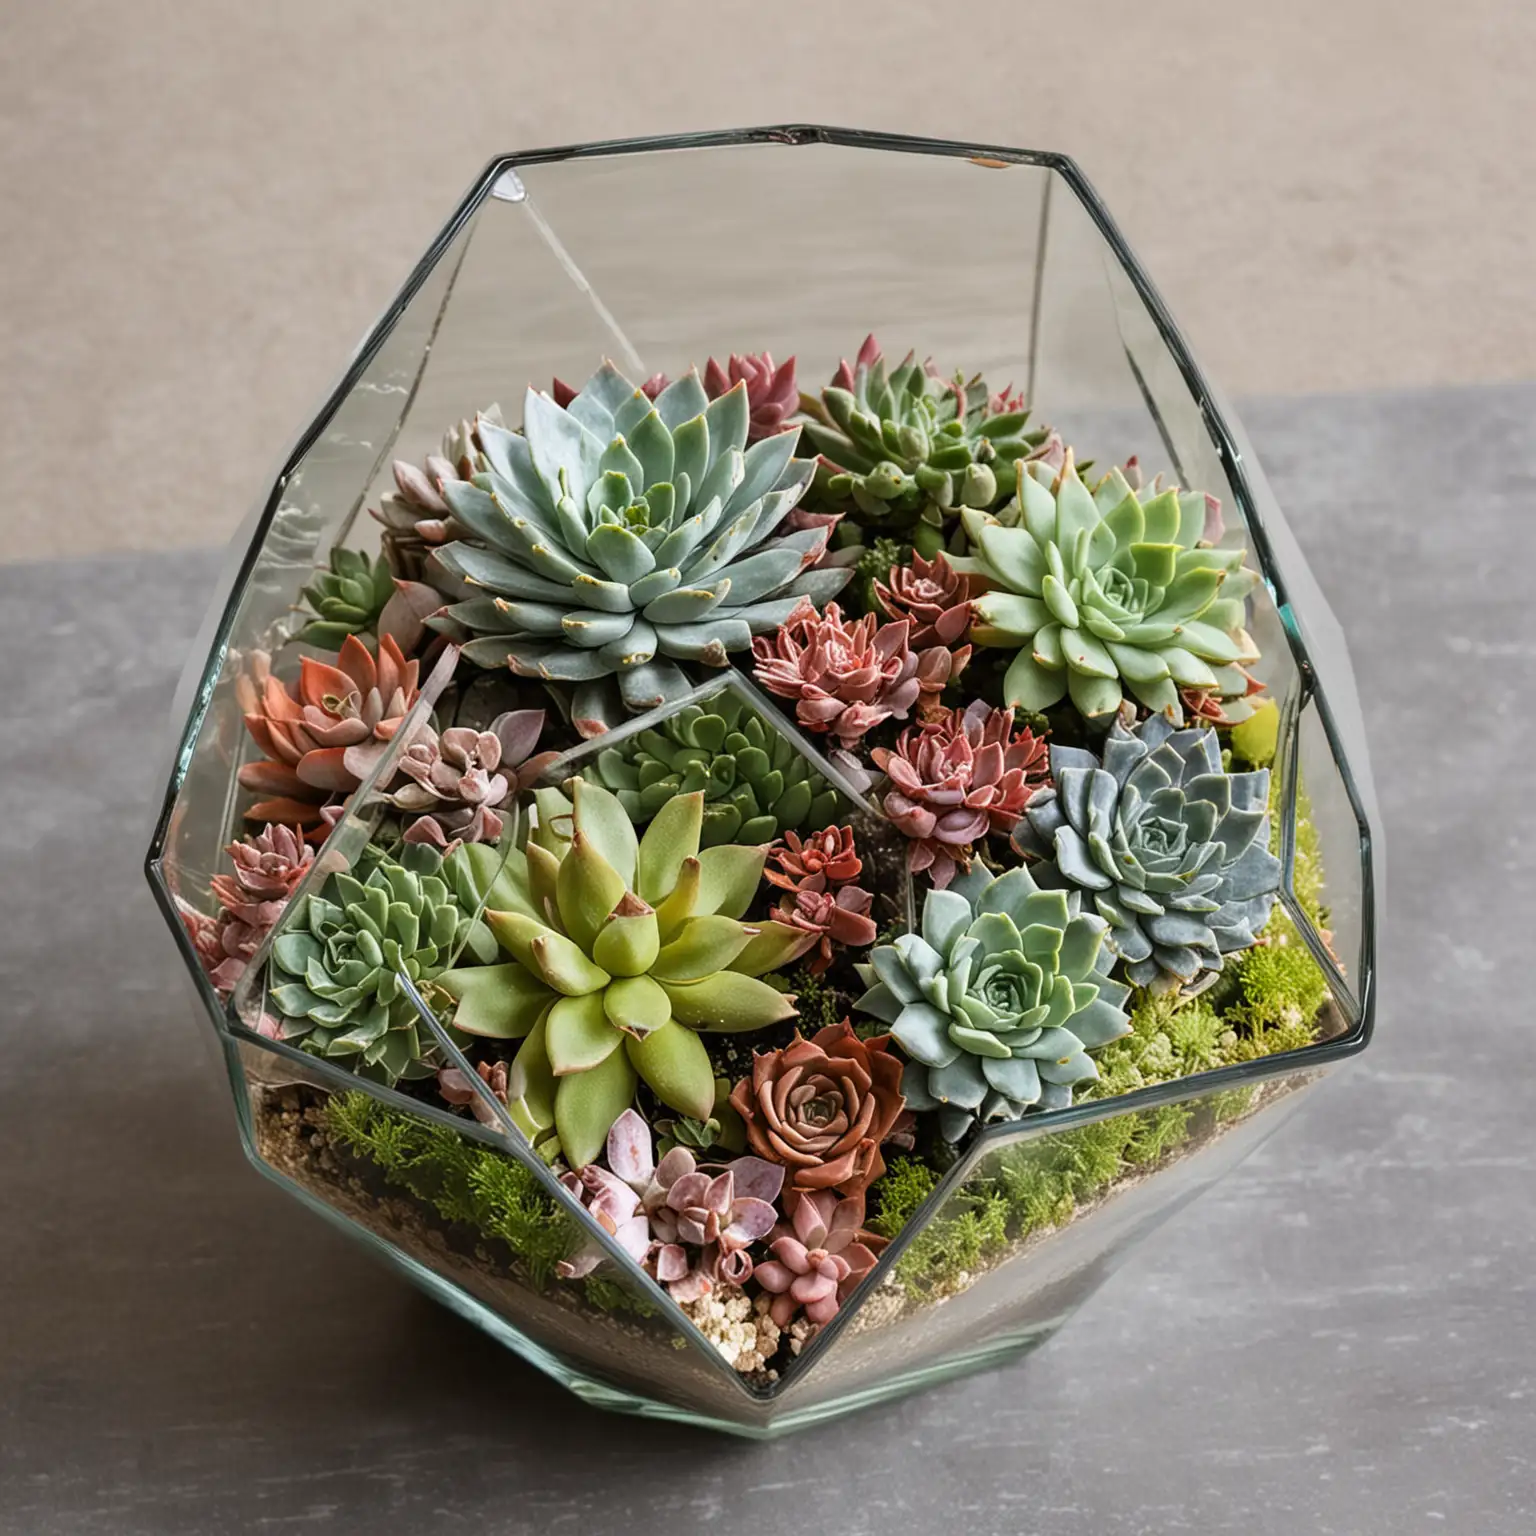 a geometric shaped terranium vase filled with succulents and tropical looking flower blossoms